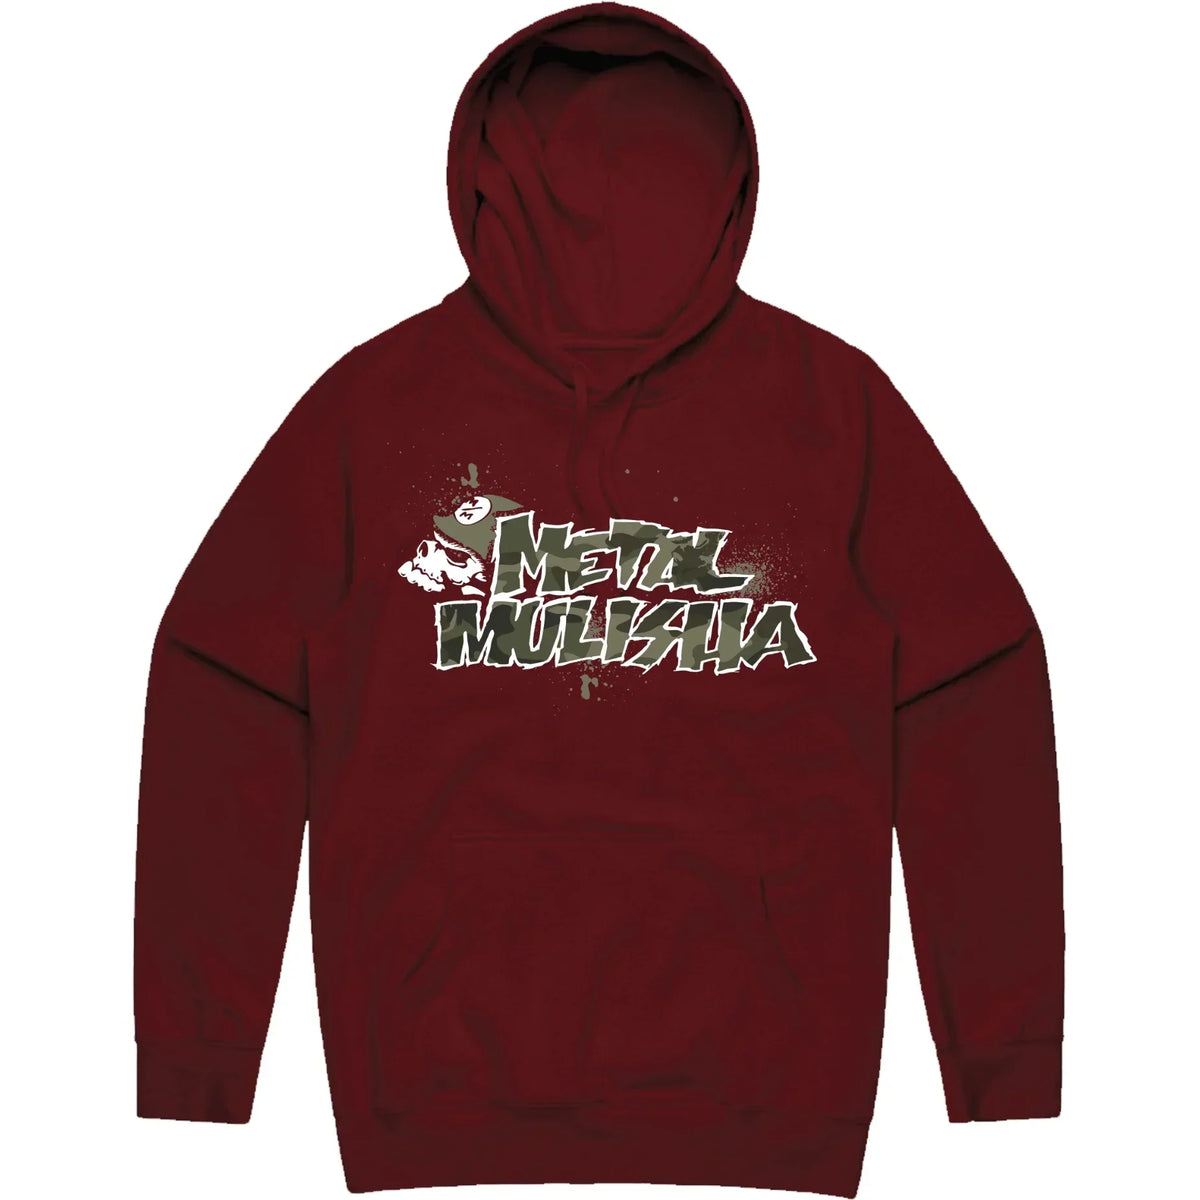 METAL MULISHA-Men's-Knit-Hooded-Pullover-The-Grunt - PULLOVER HOODIE - Synik Clothing - synikclothing.com